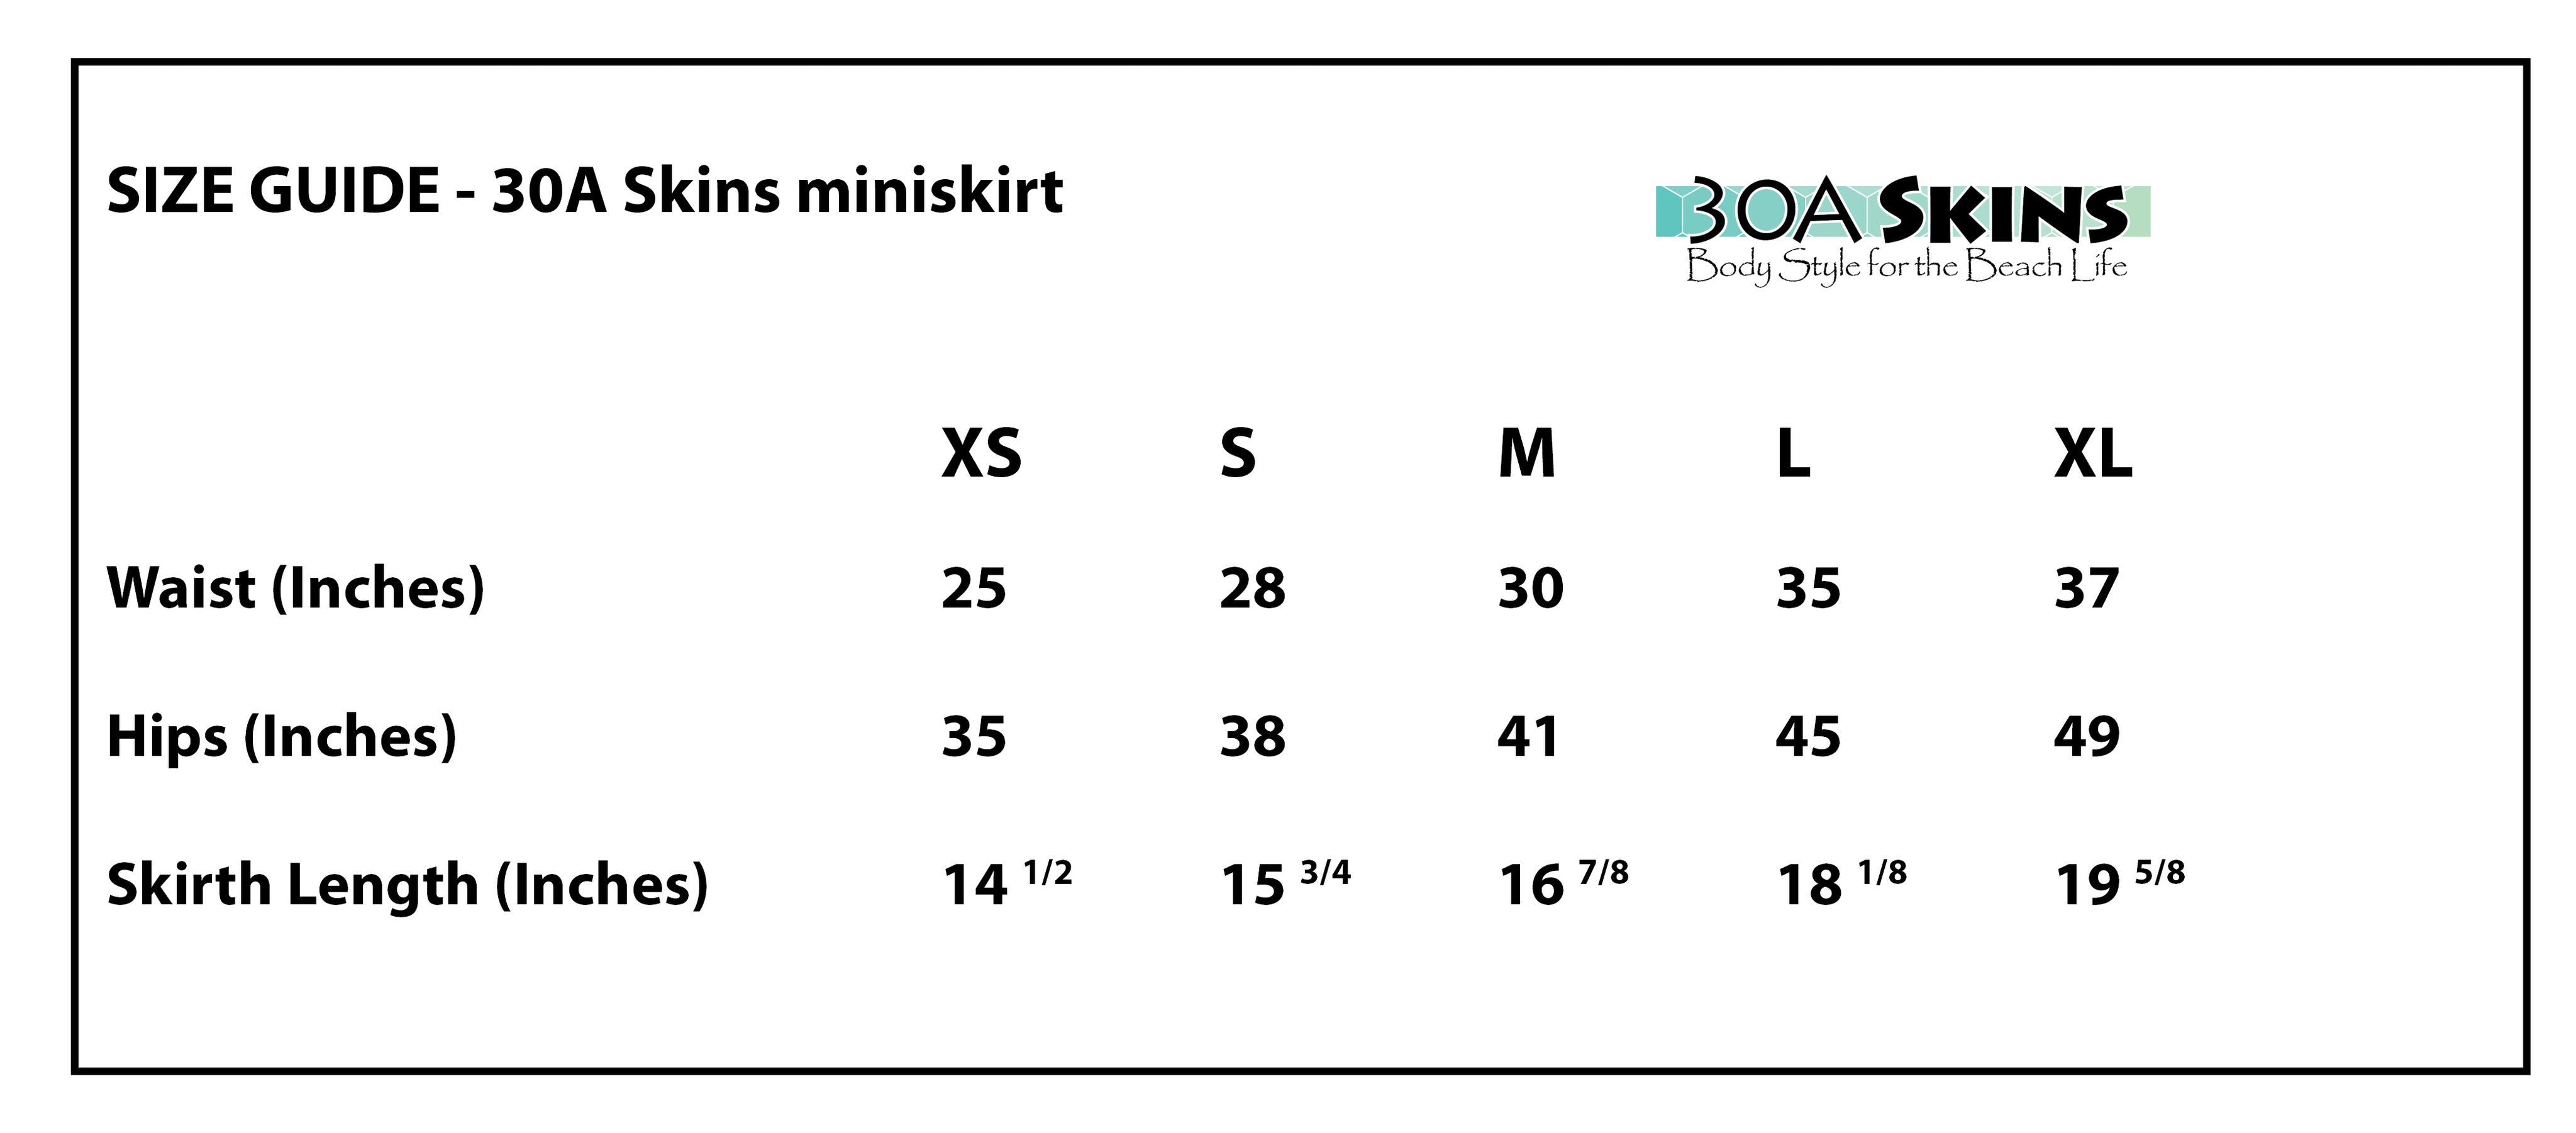 30A skins miniskirt sizing guide